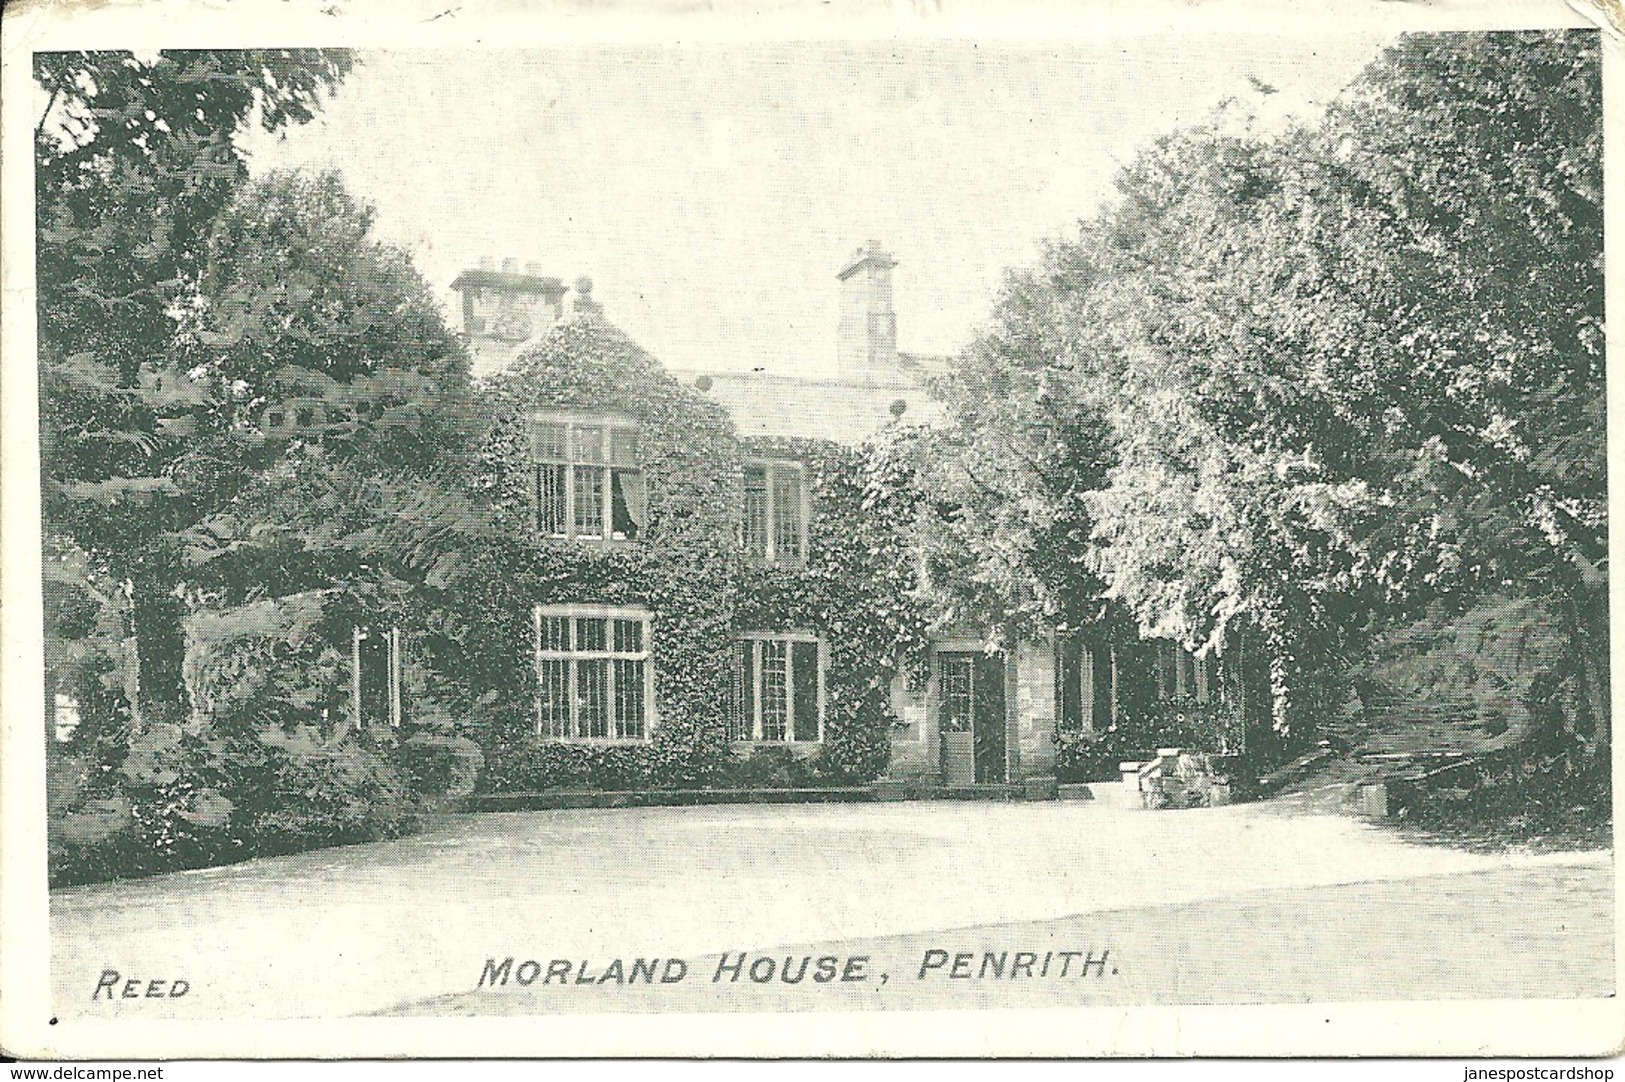 MORLAND HOUSE - PENRITH - CUMBRIA - WITH SHAP R.S.O.WESTMORLAND  RAILWAY POSTMARK - Penrith